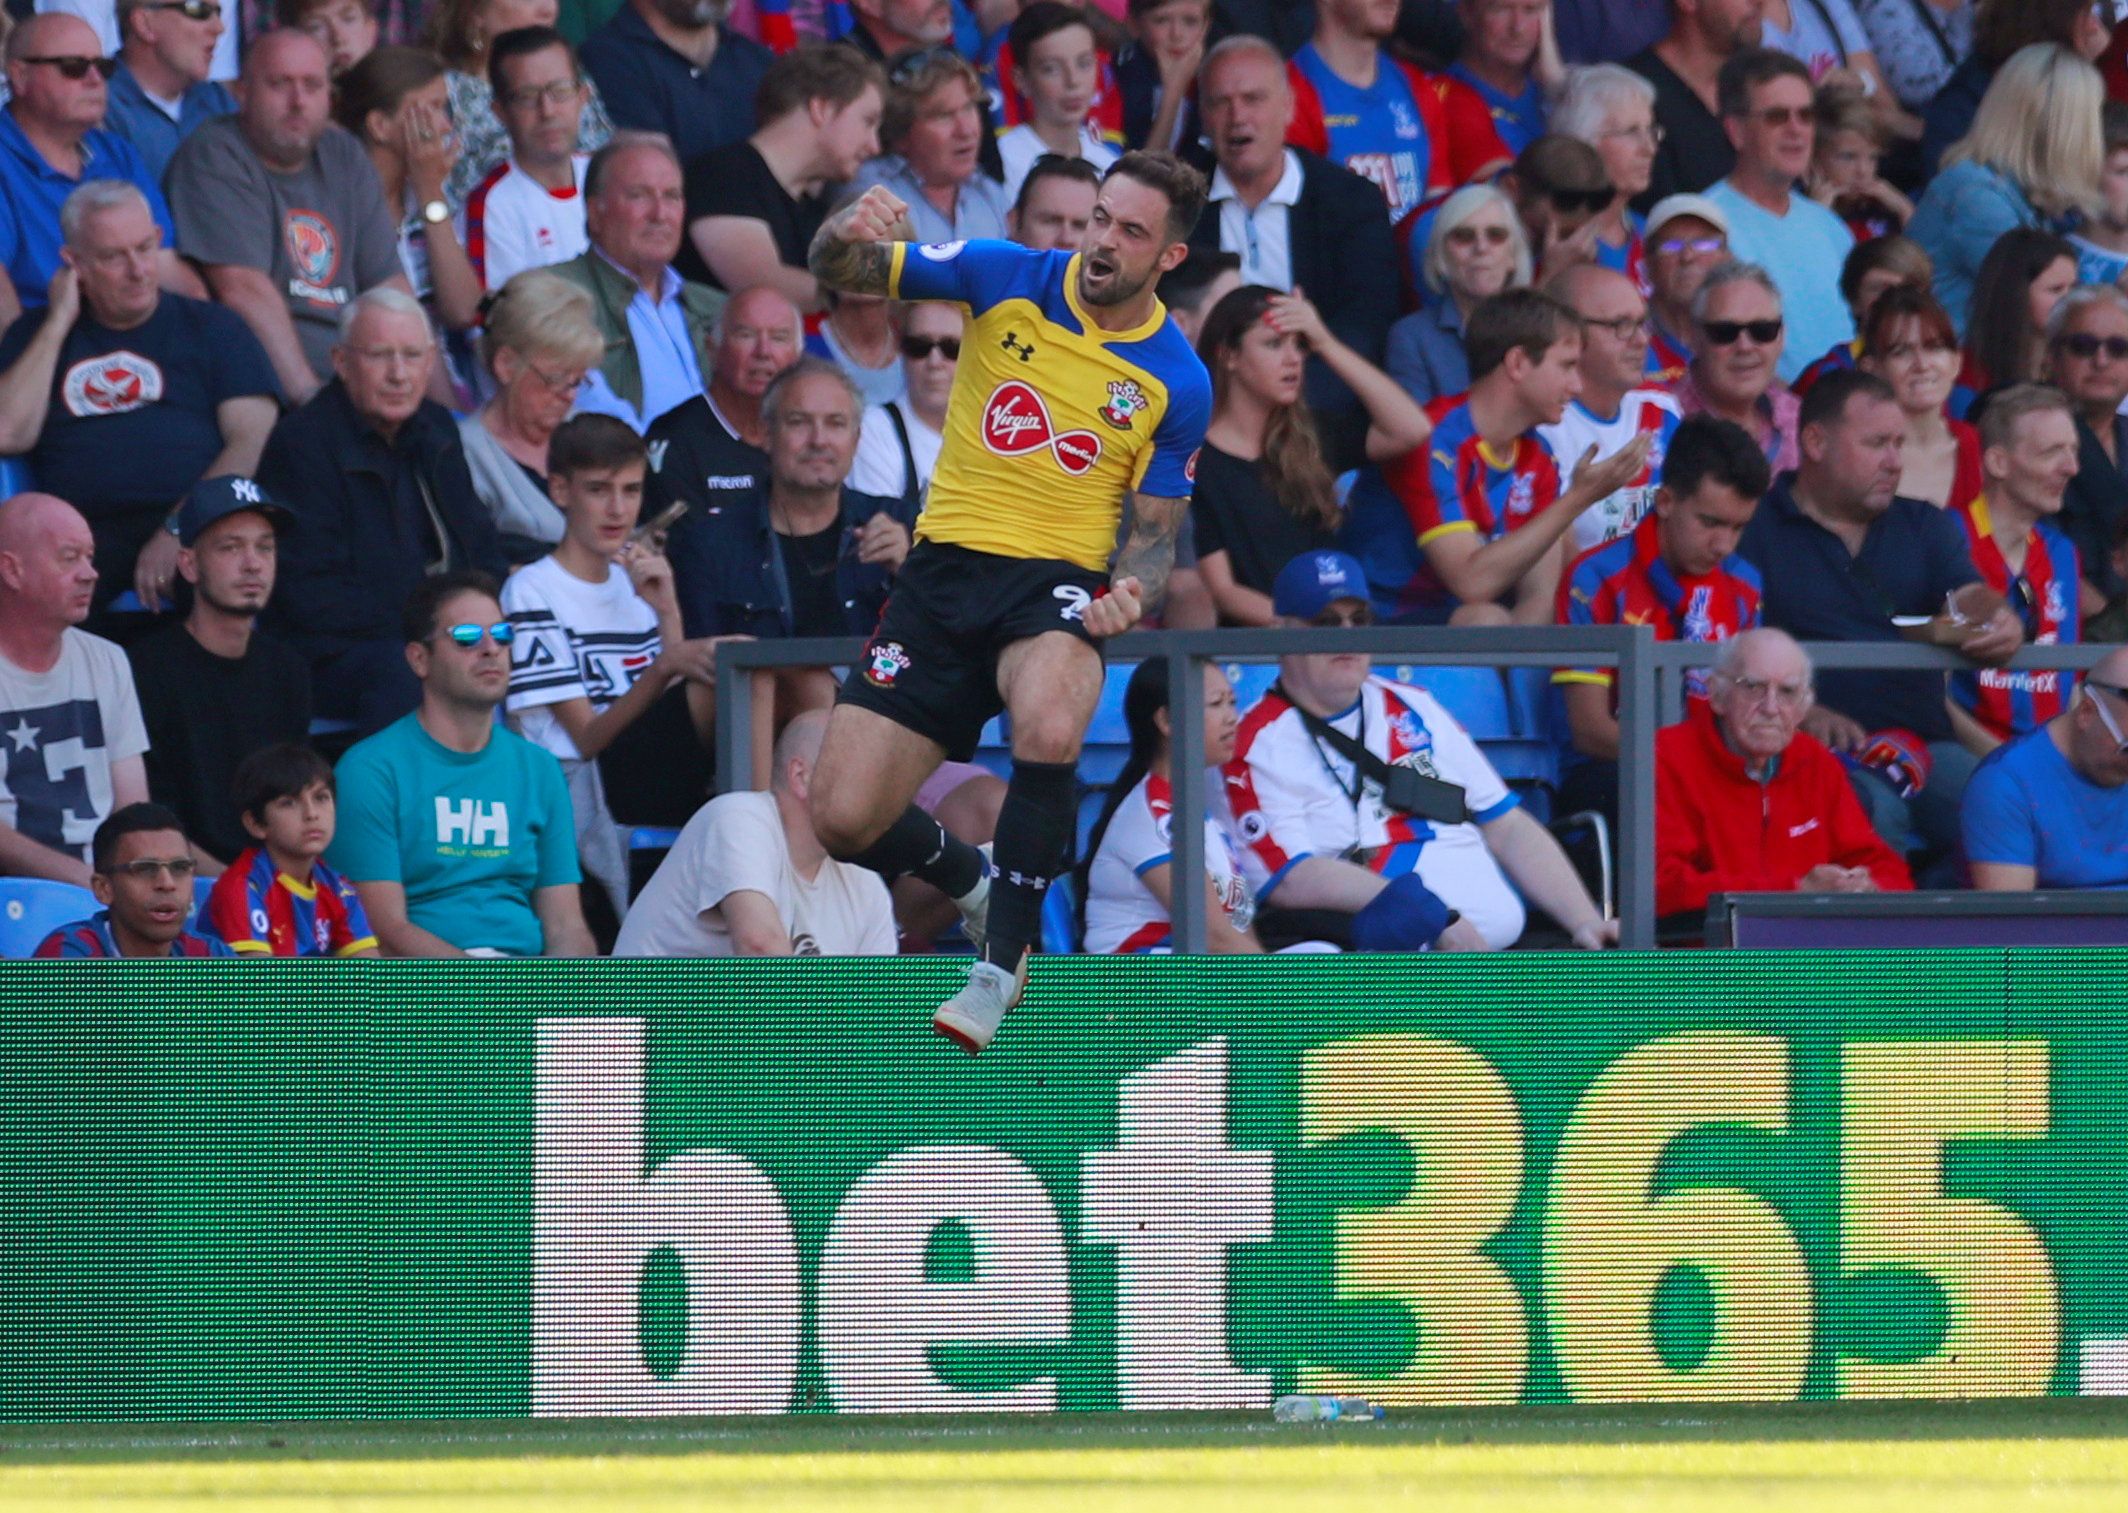 Soccer Football - Premier League - Crystal Palace v Southampton - Selhurst Park, London, Britain - September 1, 2018  Southampton's Danny Ings celebrates scoring their first goal           Action Images via Reuters/Andrew Couldridge  EDITORIAL USE ONLY. No use with unauthorized audio, video, data, fixture lists, club/league logos or 